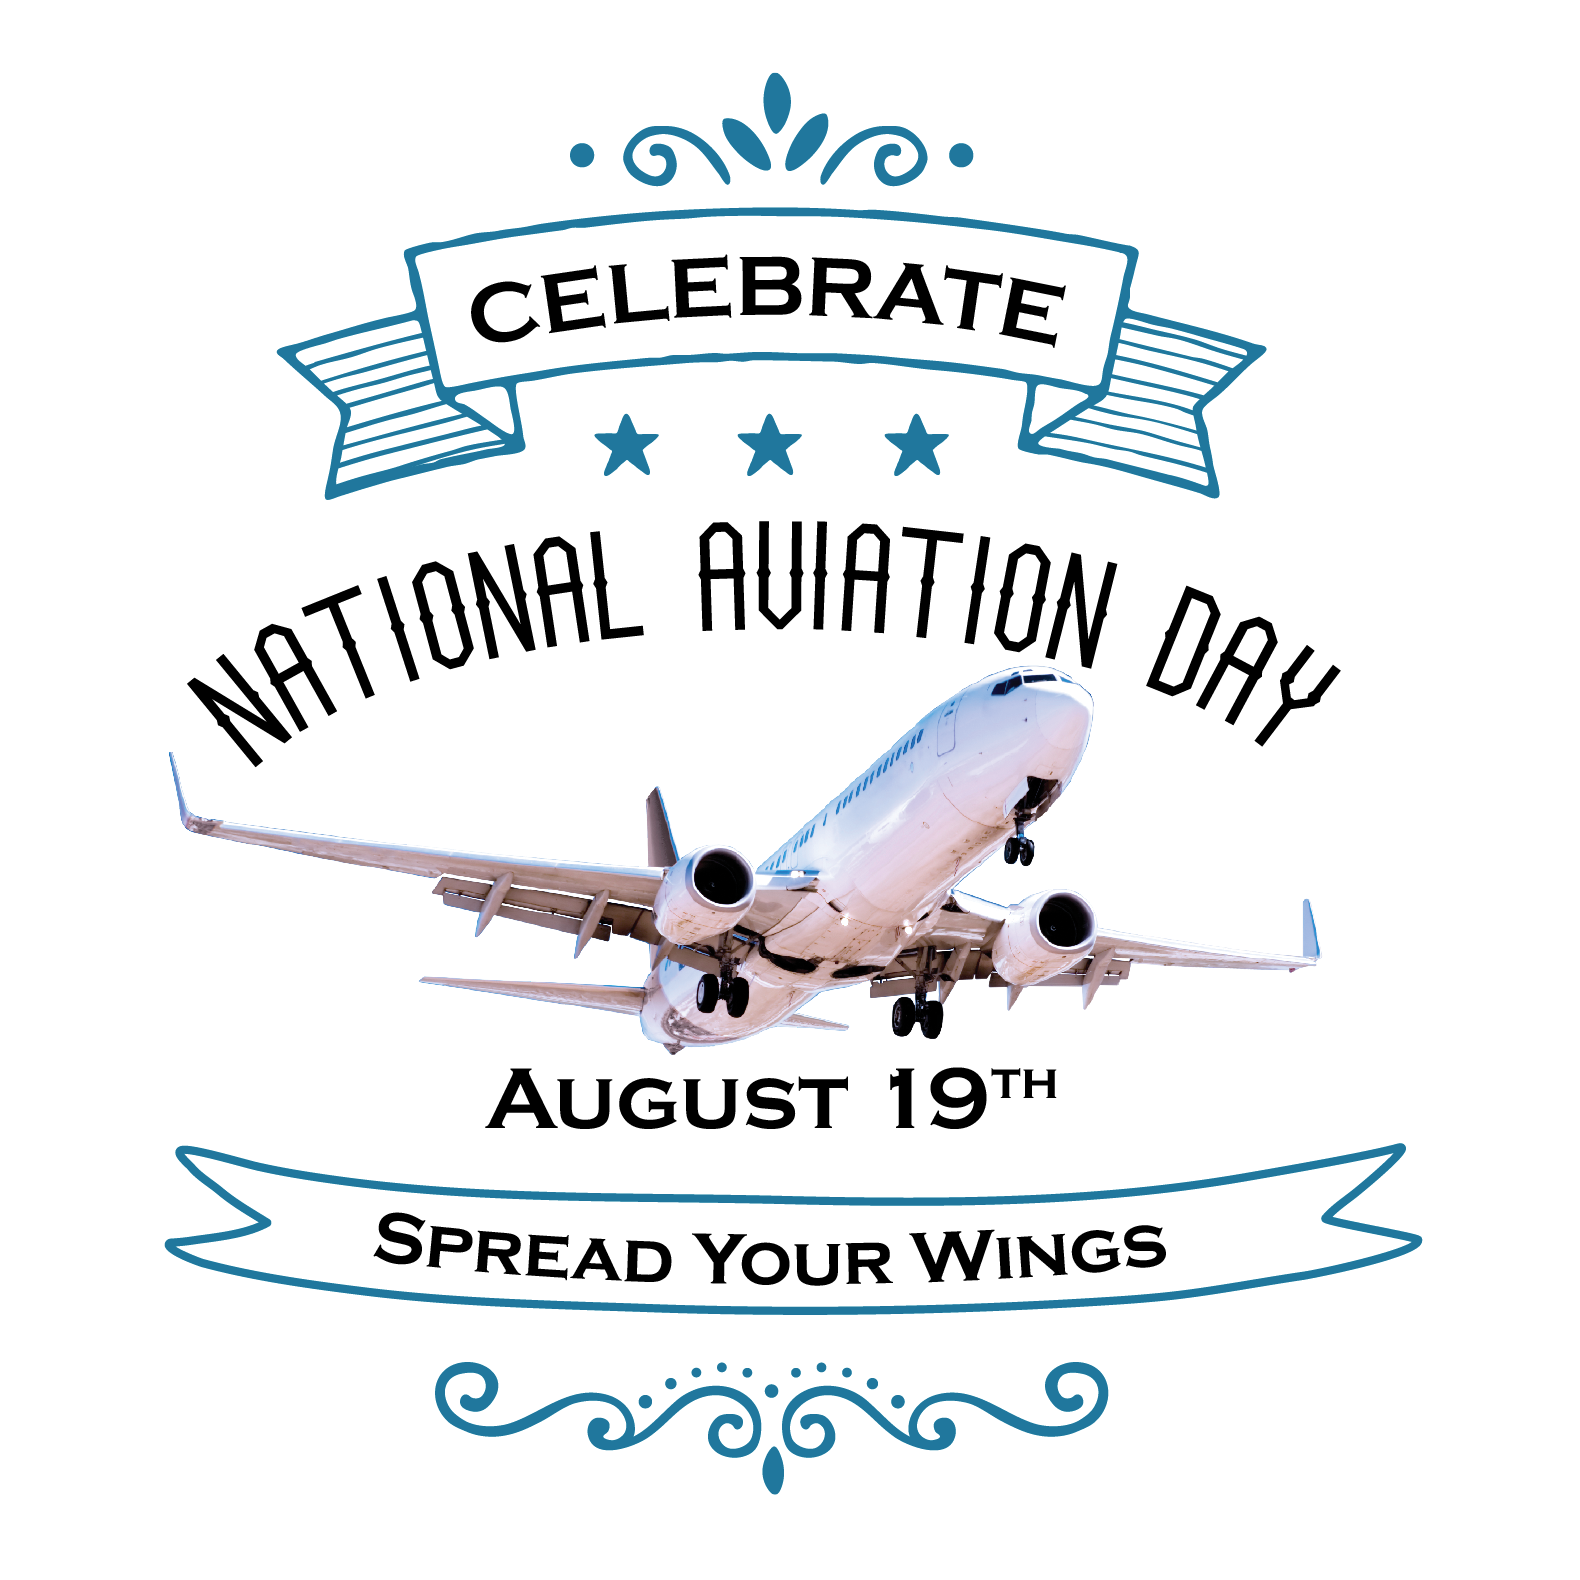 10 Airplane facts in honor of National Aviation Day